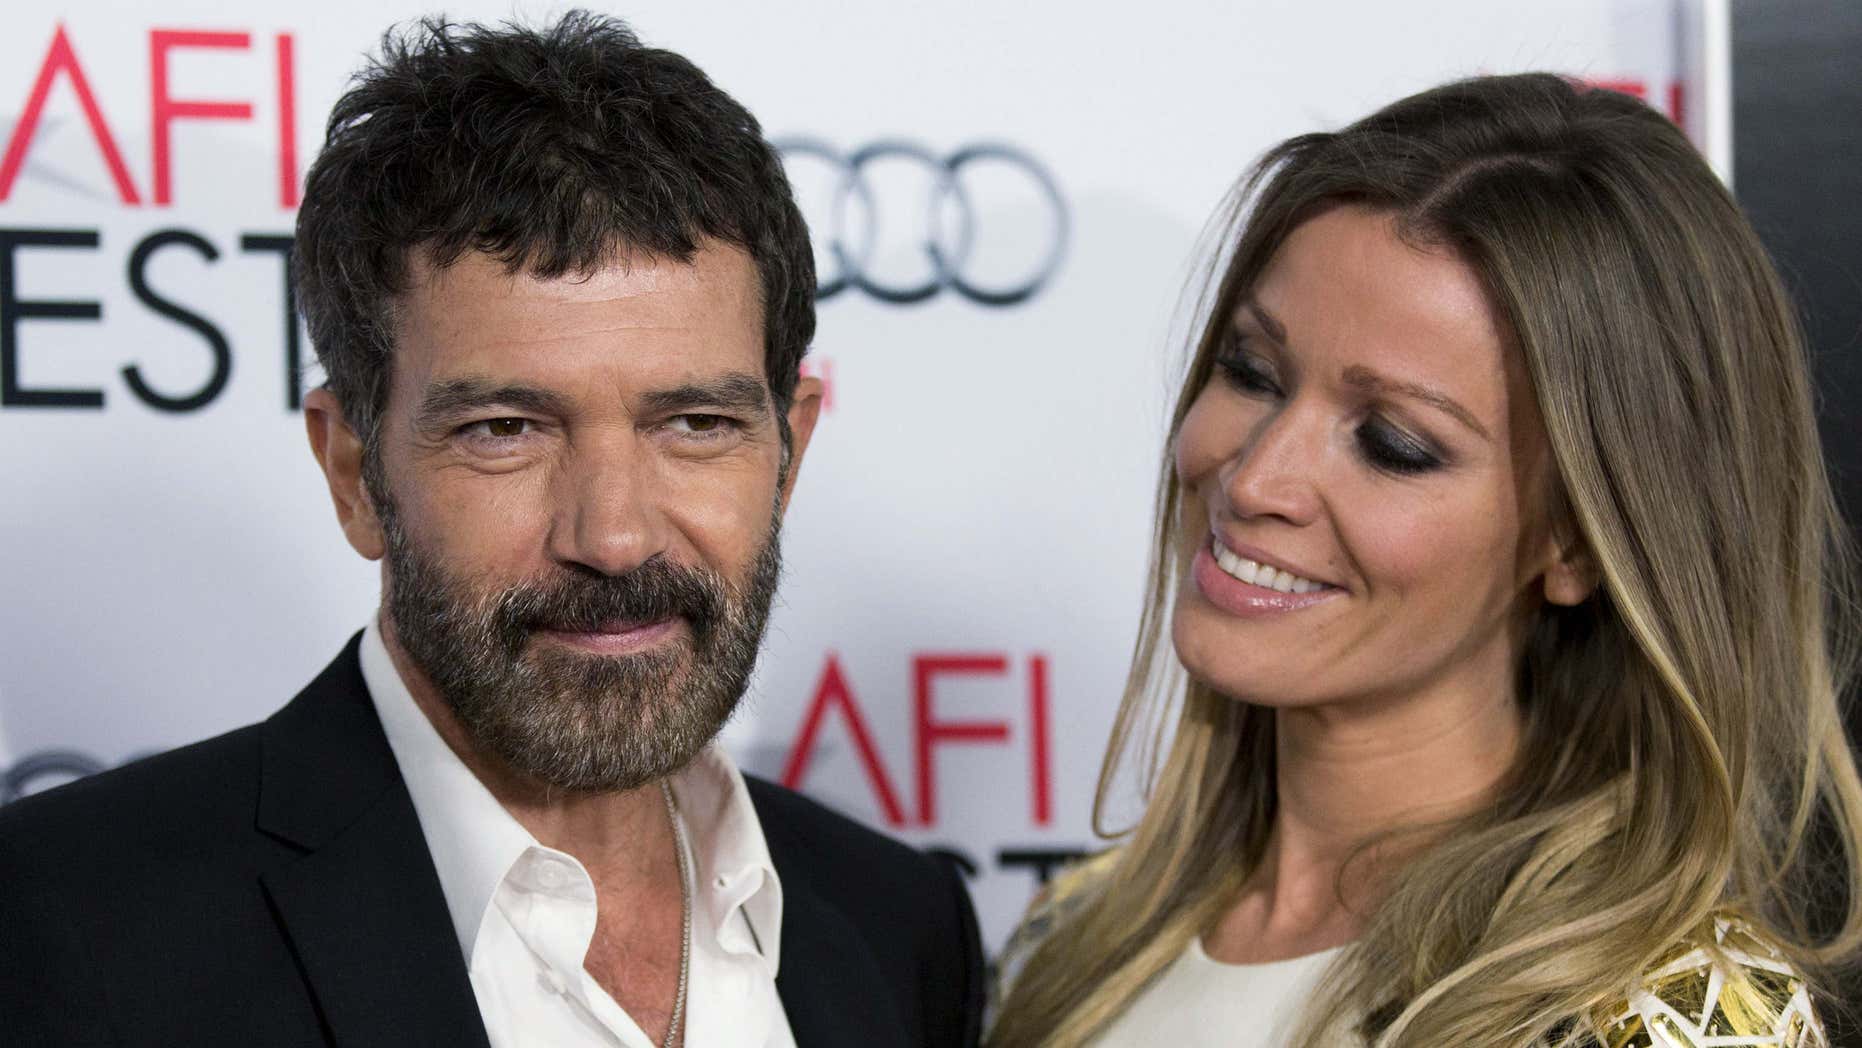 Antonio Banderas hospitalized after experiencing 'agonizing chest pains' | Fox News